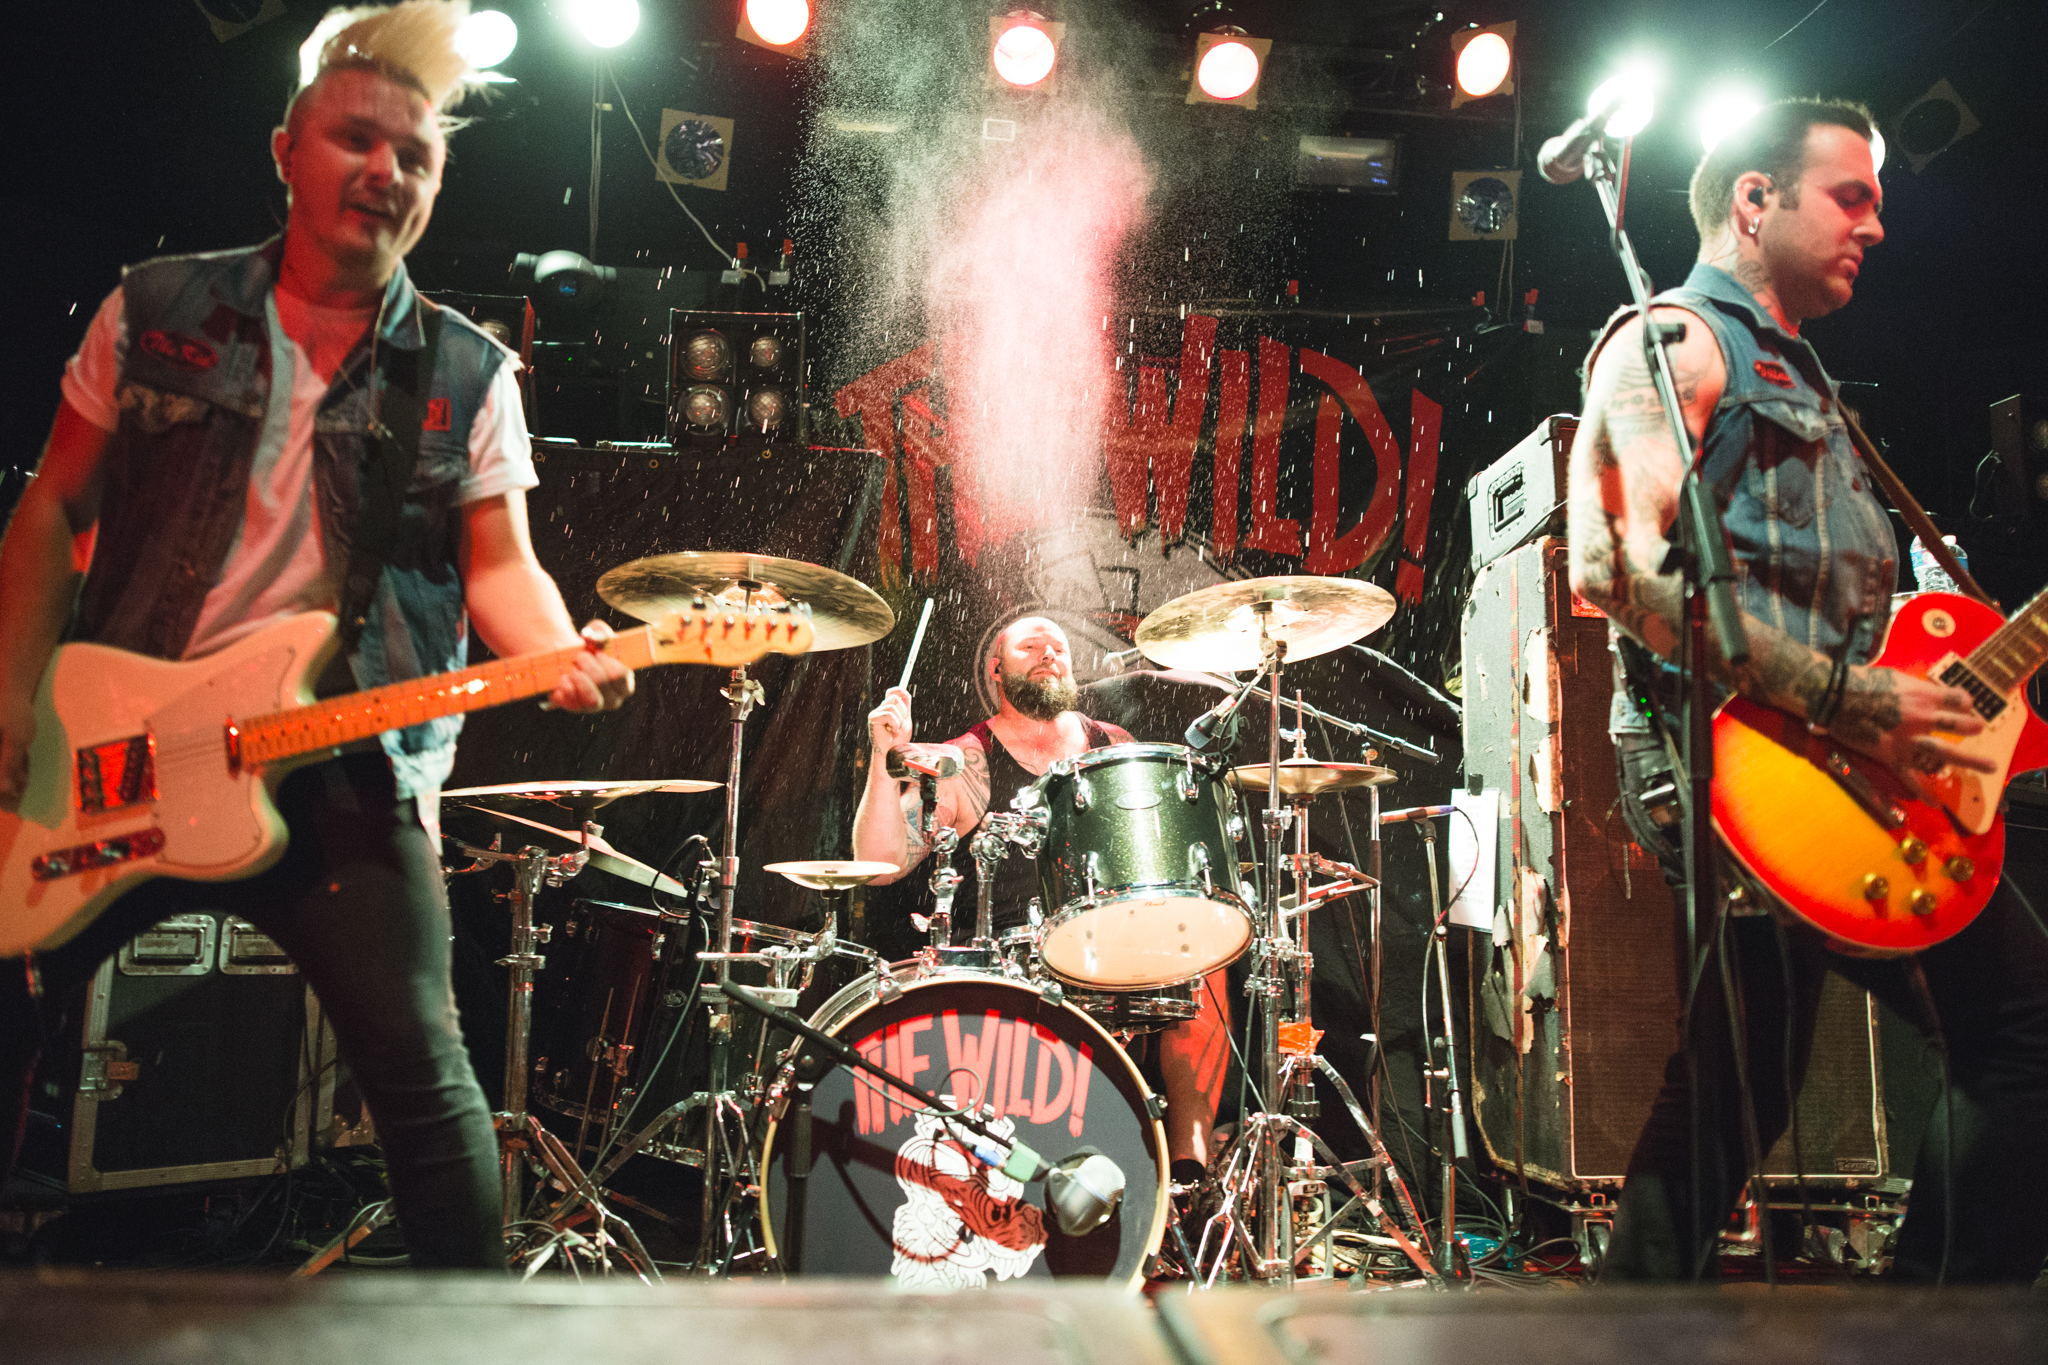 The Wild - Photo by Lindsey Blane